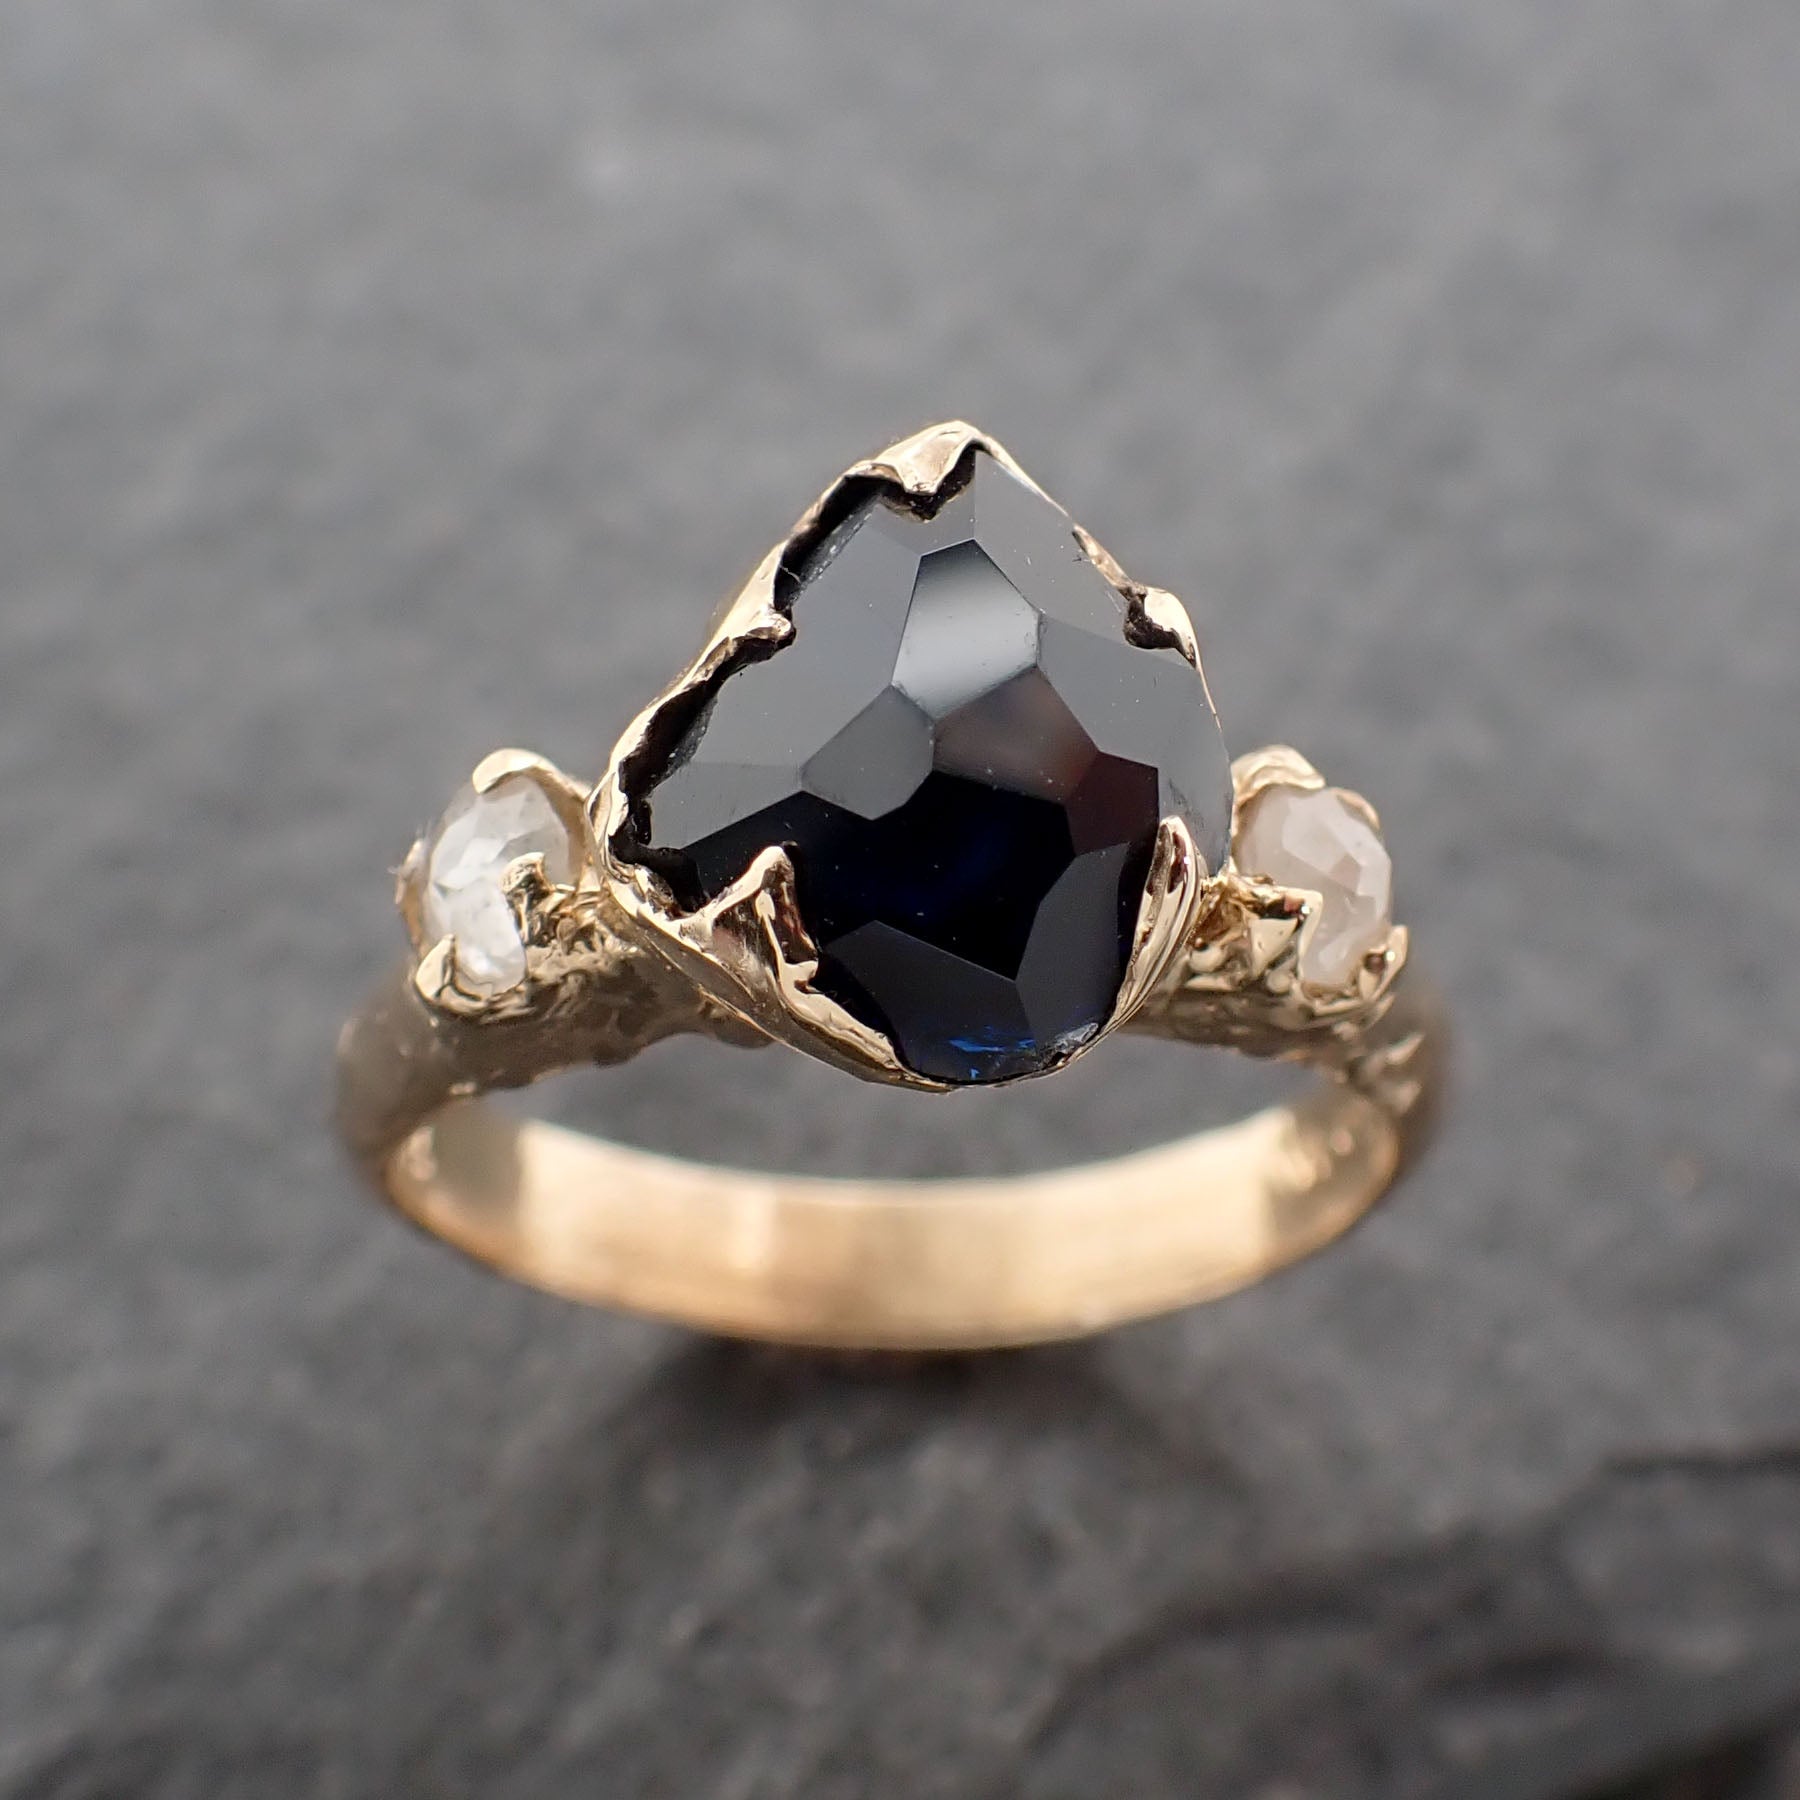 Partially faceted dark blue Sapphire and fancy Diamonds 18k Yellow Gold Engagement Wedding Gemstone Multi stone Ring 2440